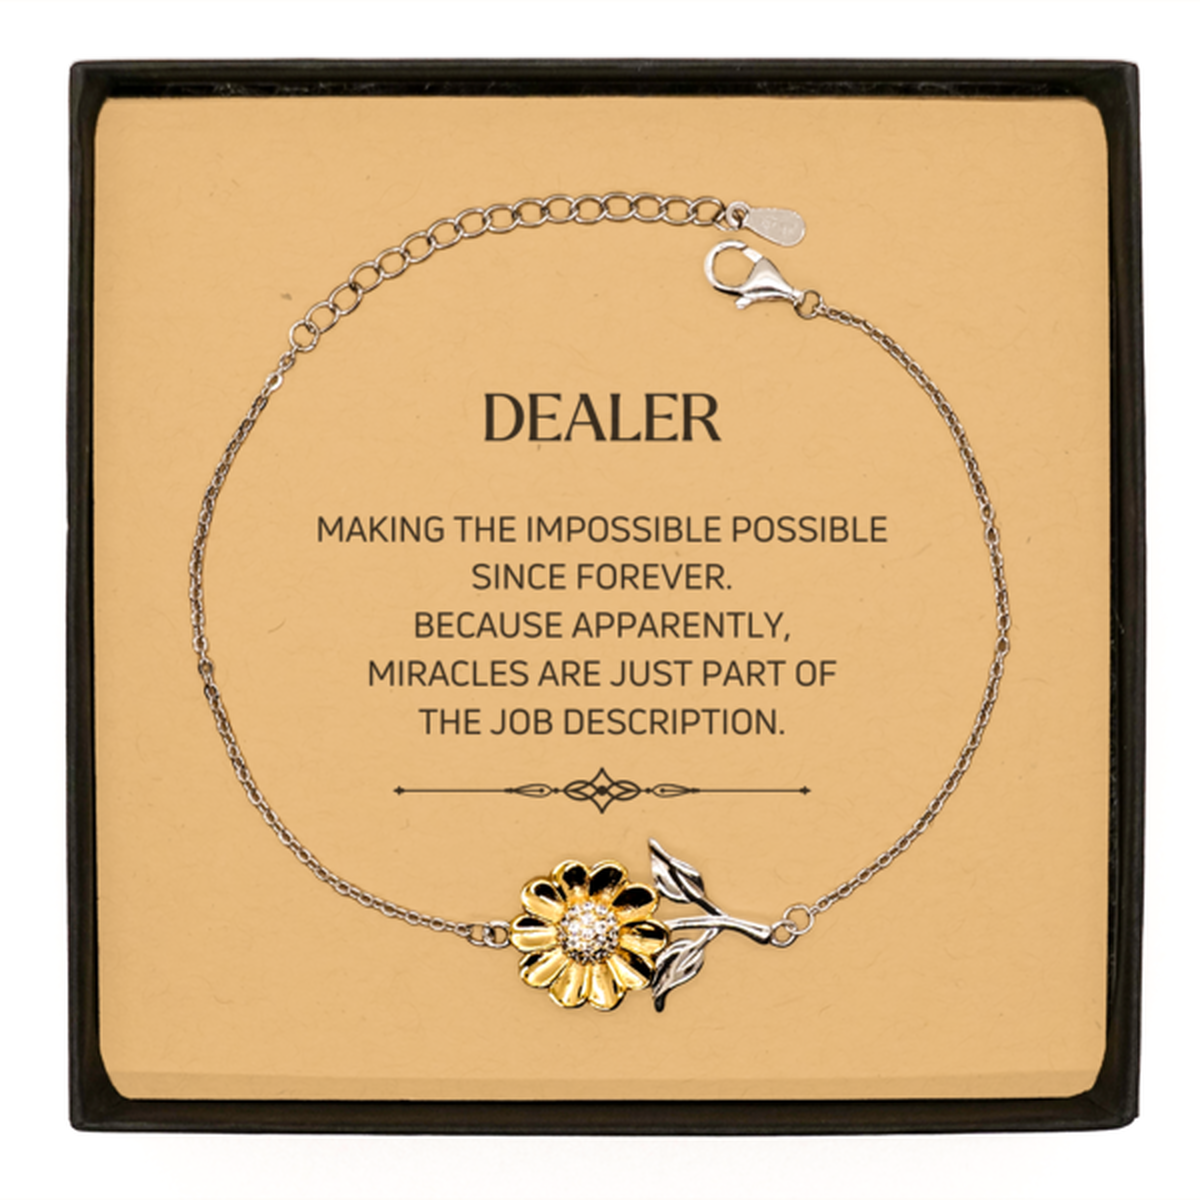 Funny Dealer Gifts, Miracles are just part of the job description, Inspirational Birthday Sunflower Bracelet For Dealer, Men, Women, Coworkers, Friends, Boss